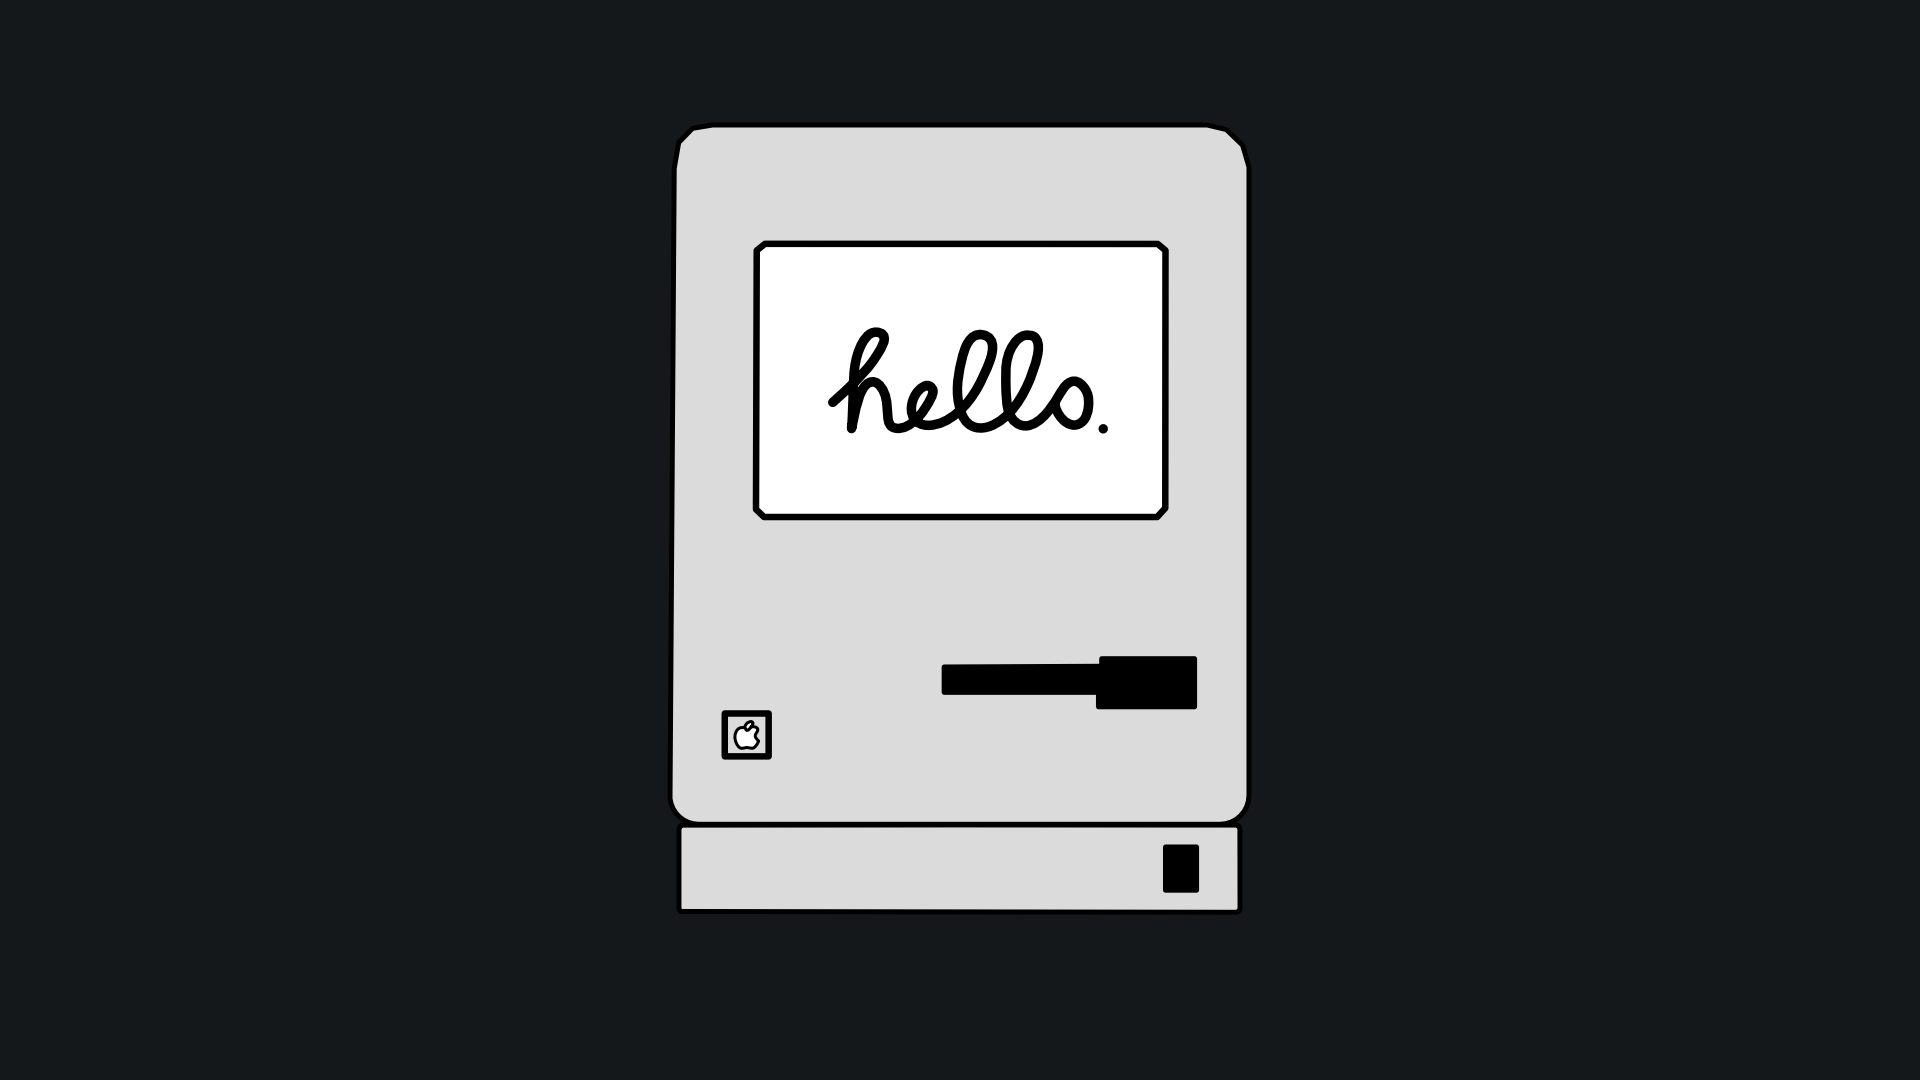 "hello." printed on a drawn 1984 Apple Macintosh at the center in a black background.